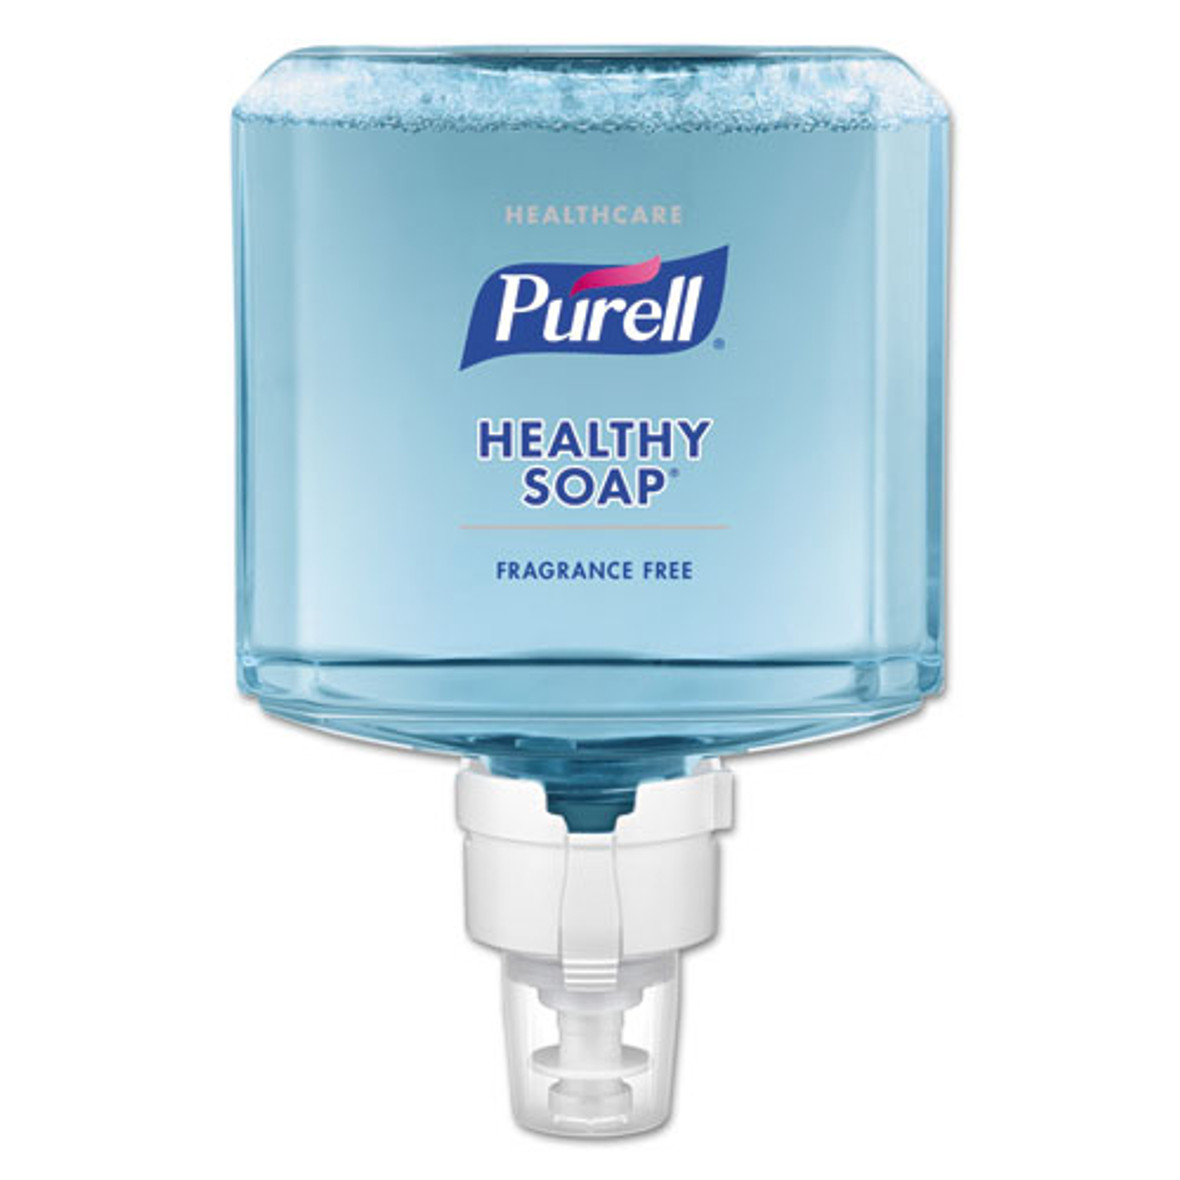 PURELL® Healthcare HEALTHY SOAP Gentle and Free Foam ES8 Refill